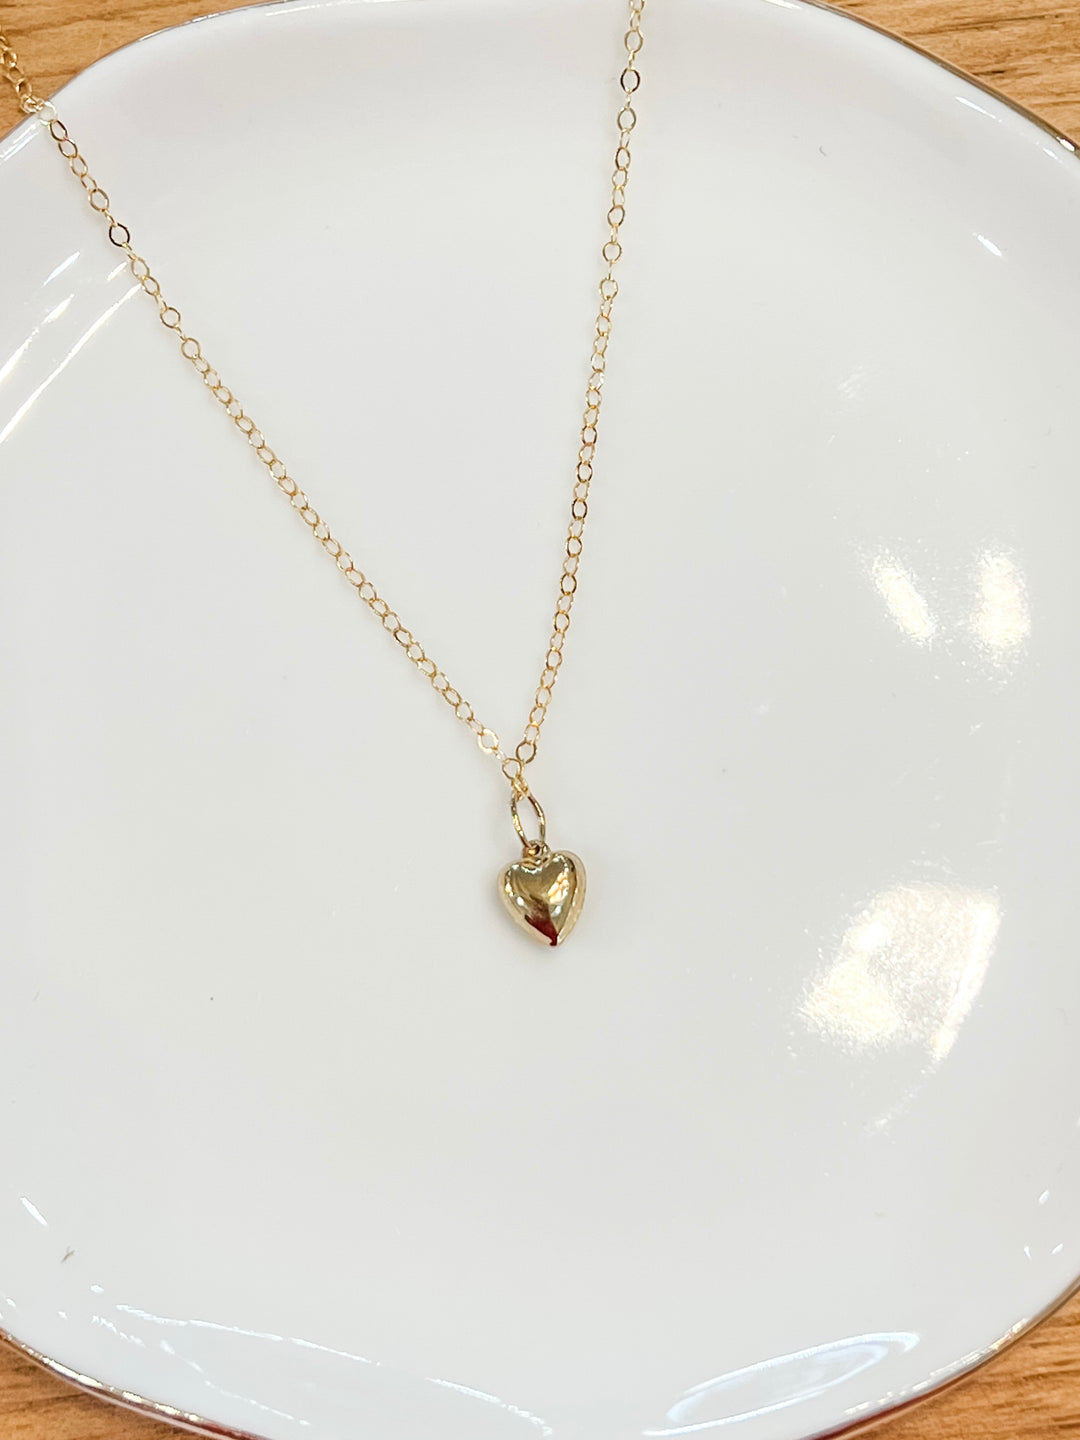 Gold Filled Puffy Heart Necklace - The Teal Antler Boutique